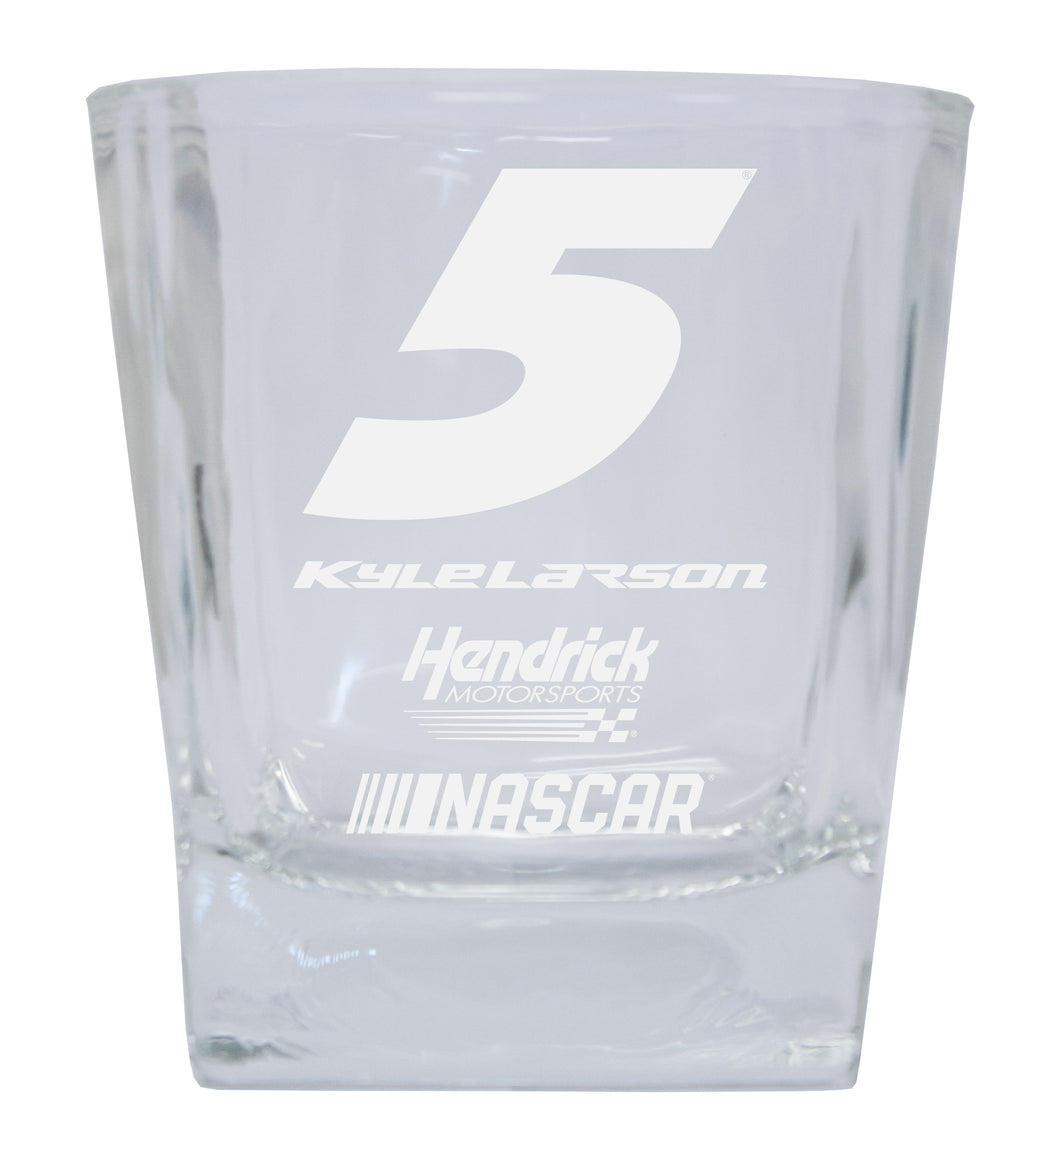 R and R Imports Kyle Larson #5 NASCAR Cup Series Etched 5 oz Shooter Glass 2-Pack